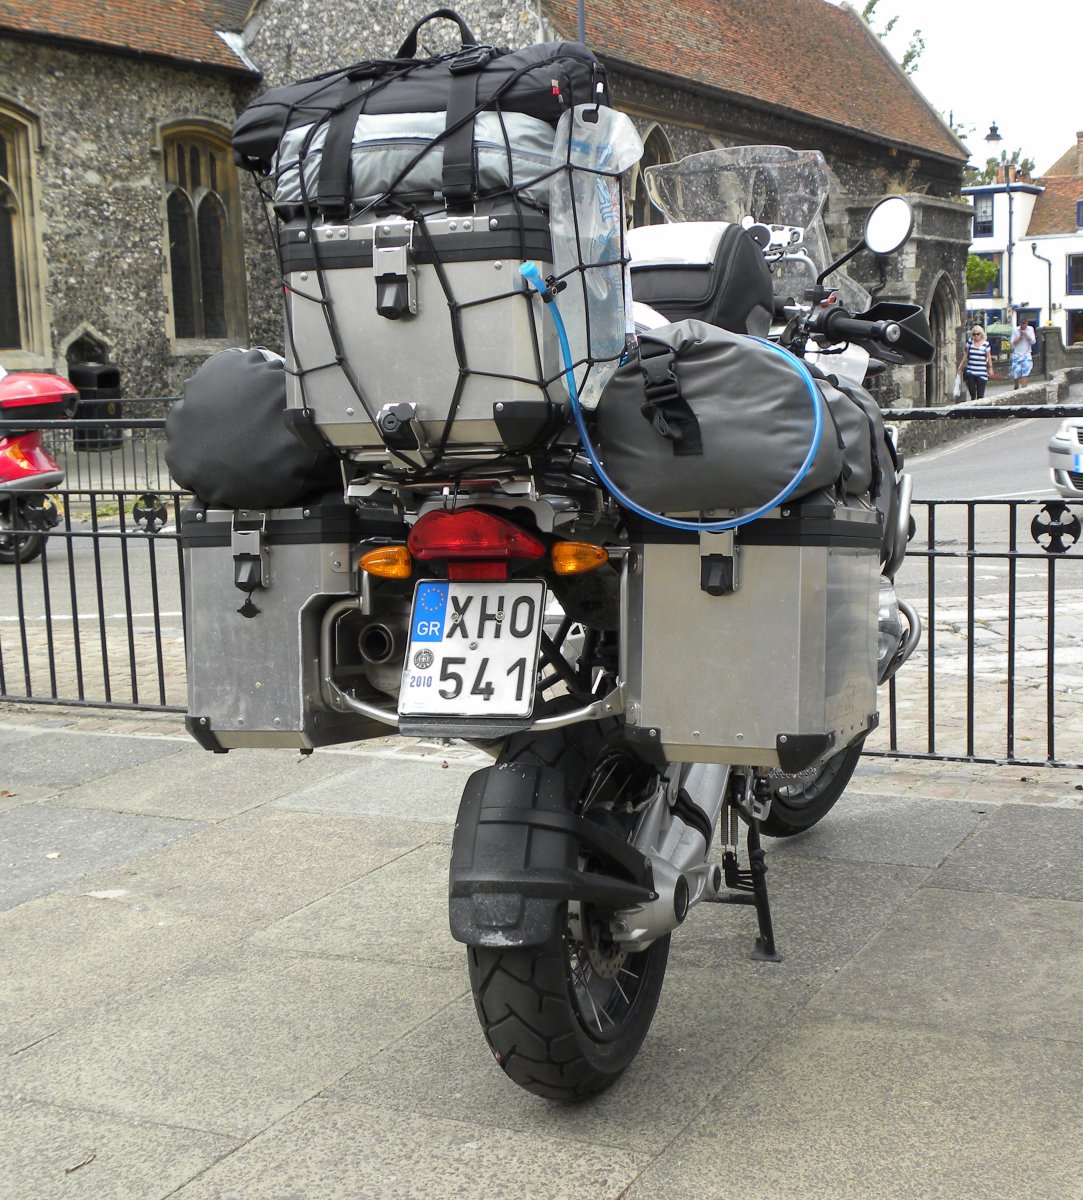 BMW_R1200GS_fully_kitted.jpg